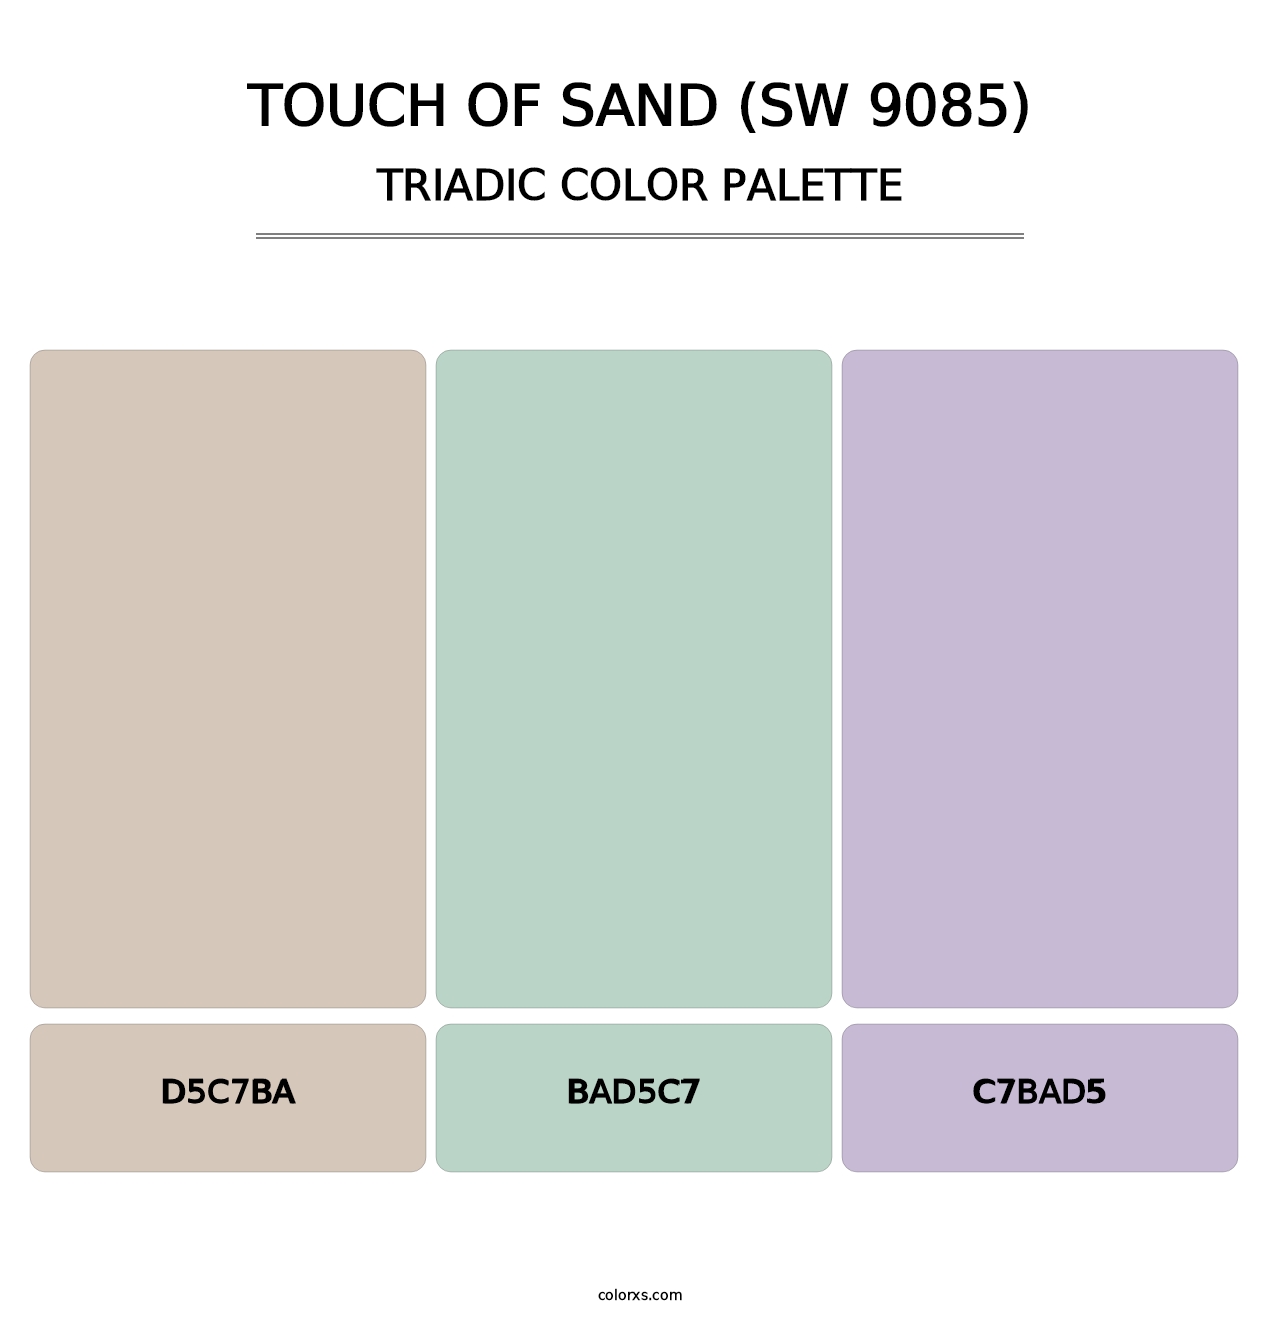 Touch of Sand (SW 9085) - Triadic Color Palette